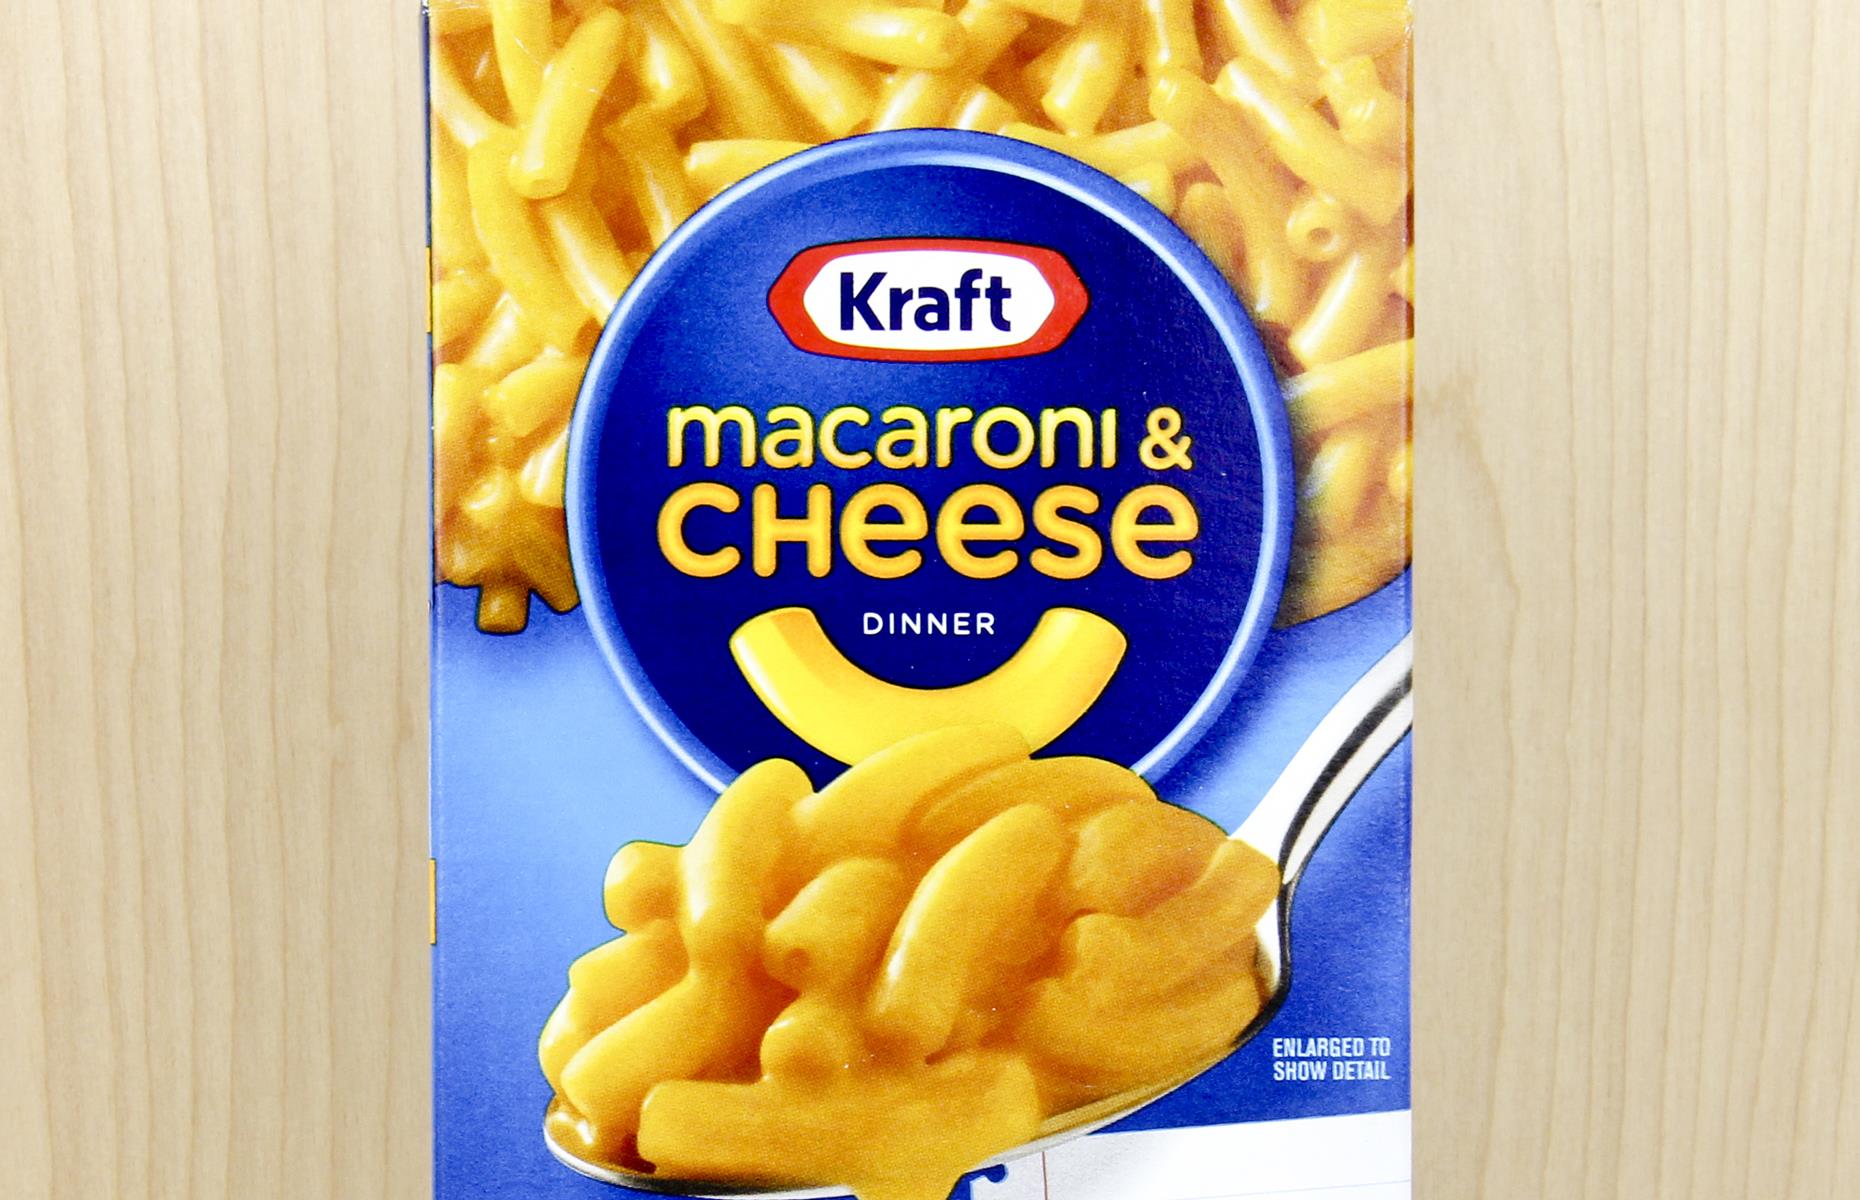 Countless Americans will recall growing up on a diet that included packaged mac 'n' cheese, notably brands such as Kraft and Batchelors. While quick and convenient (there are lots of hacks online about how to pimp up a packet), it's still processed food. Though now largely free from artificial colors and preservatives, it's healthier to make a batch and freeze so you have homemade ready meals to hand. Read on to find out how.